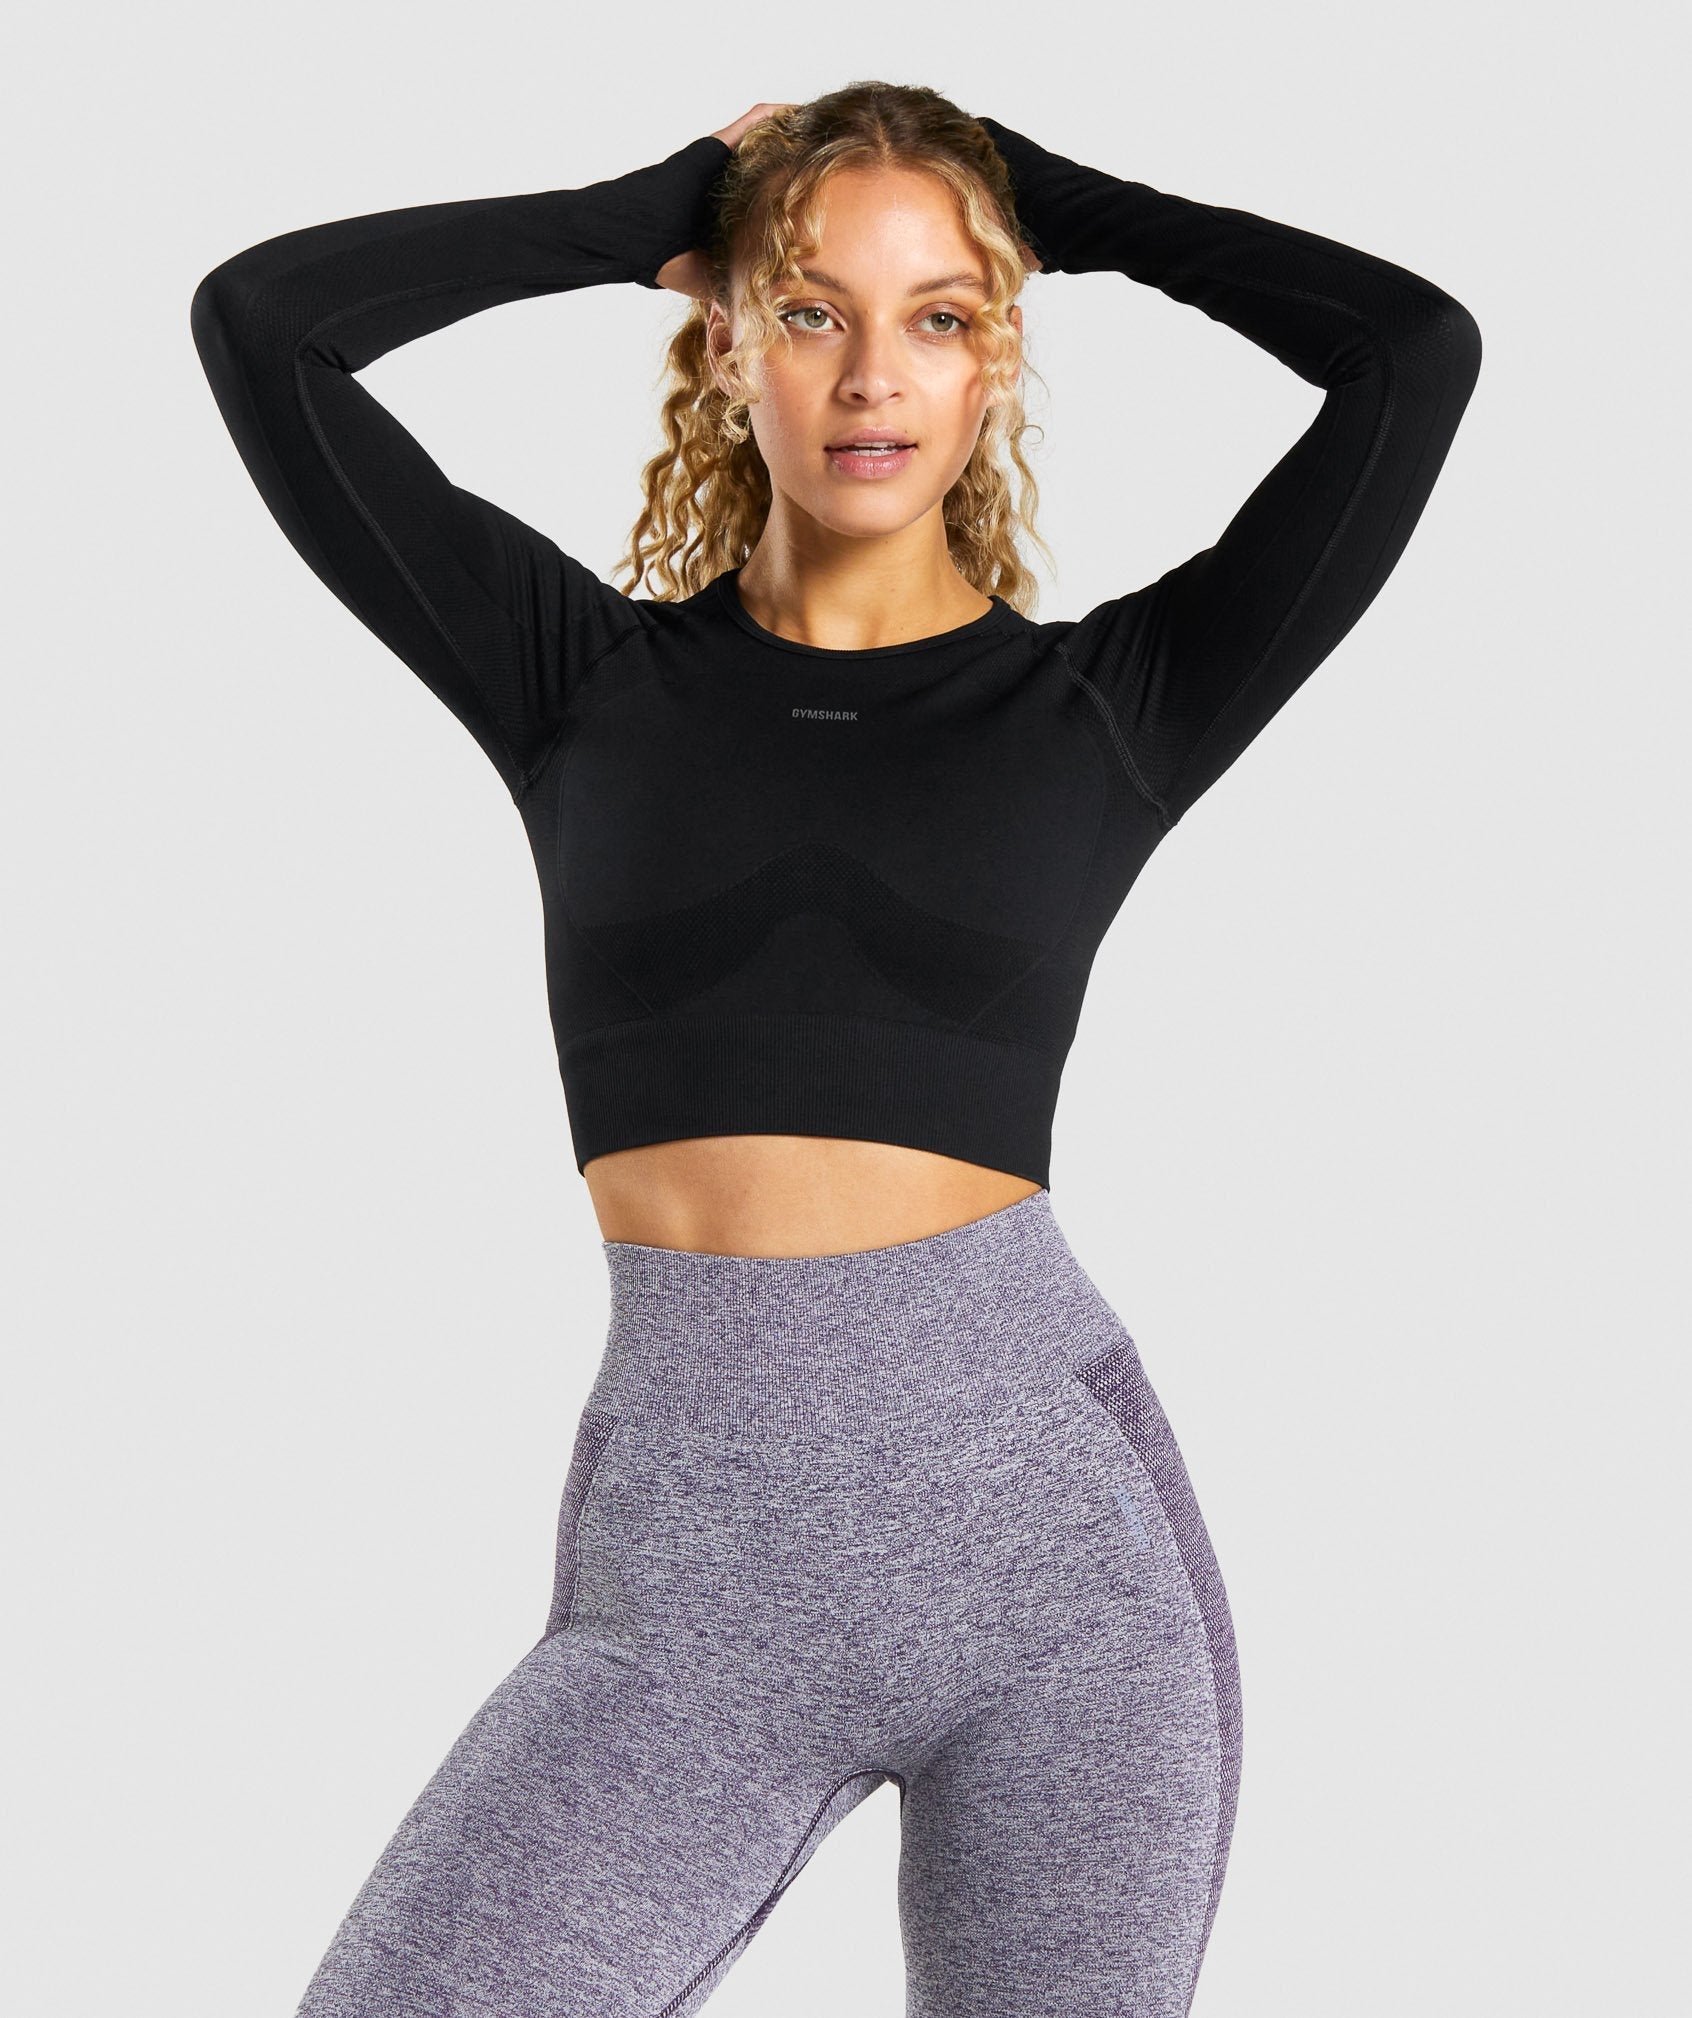 Flex Sports Long Sleeve Crop Top in Black/Charcoal - view 1